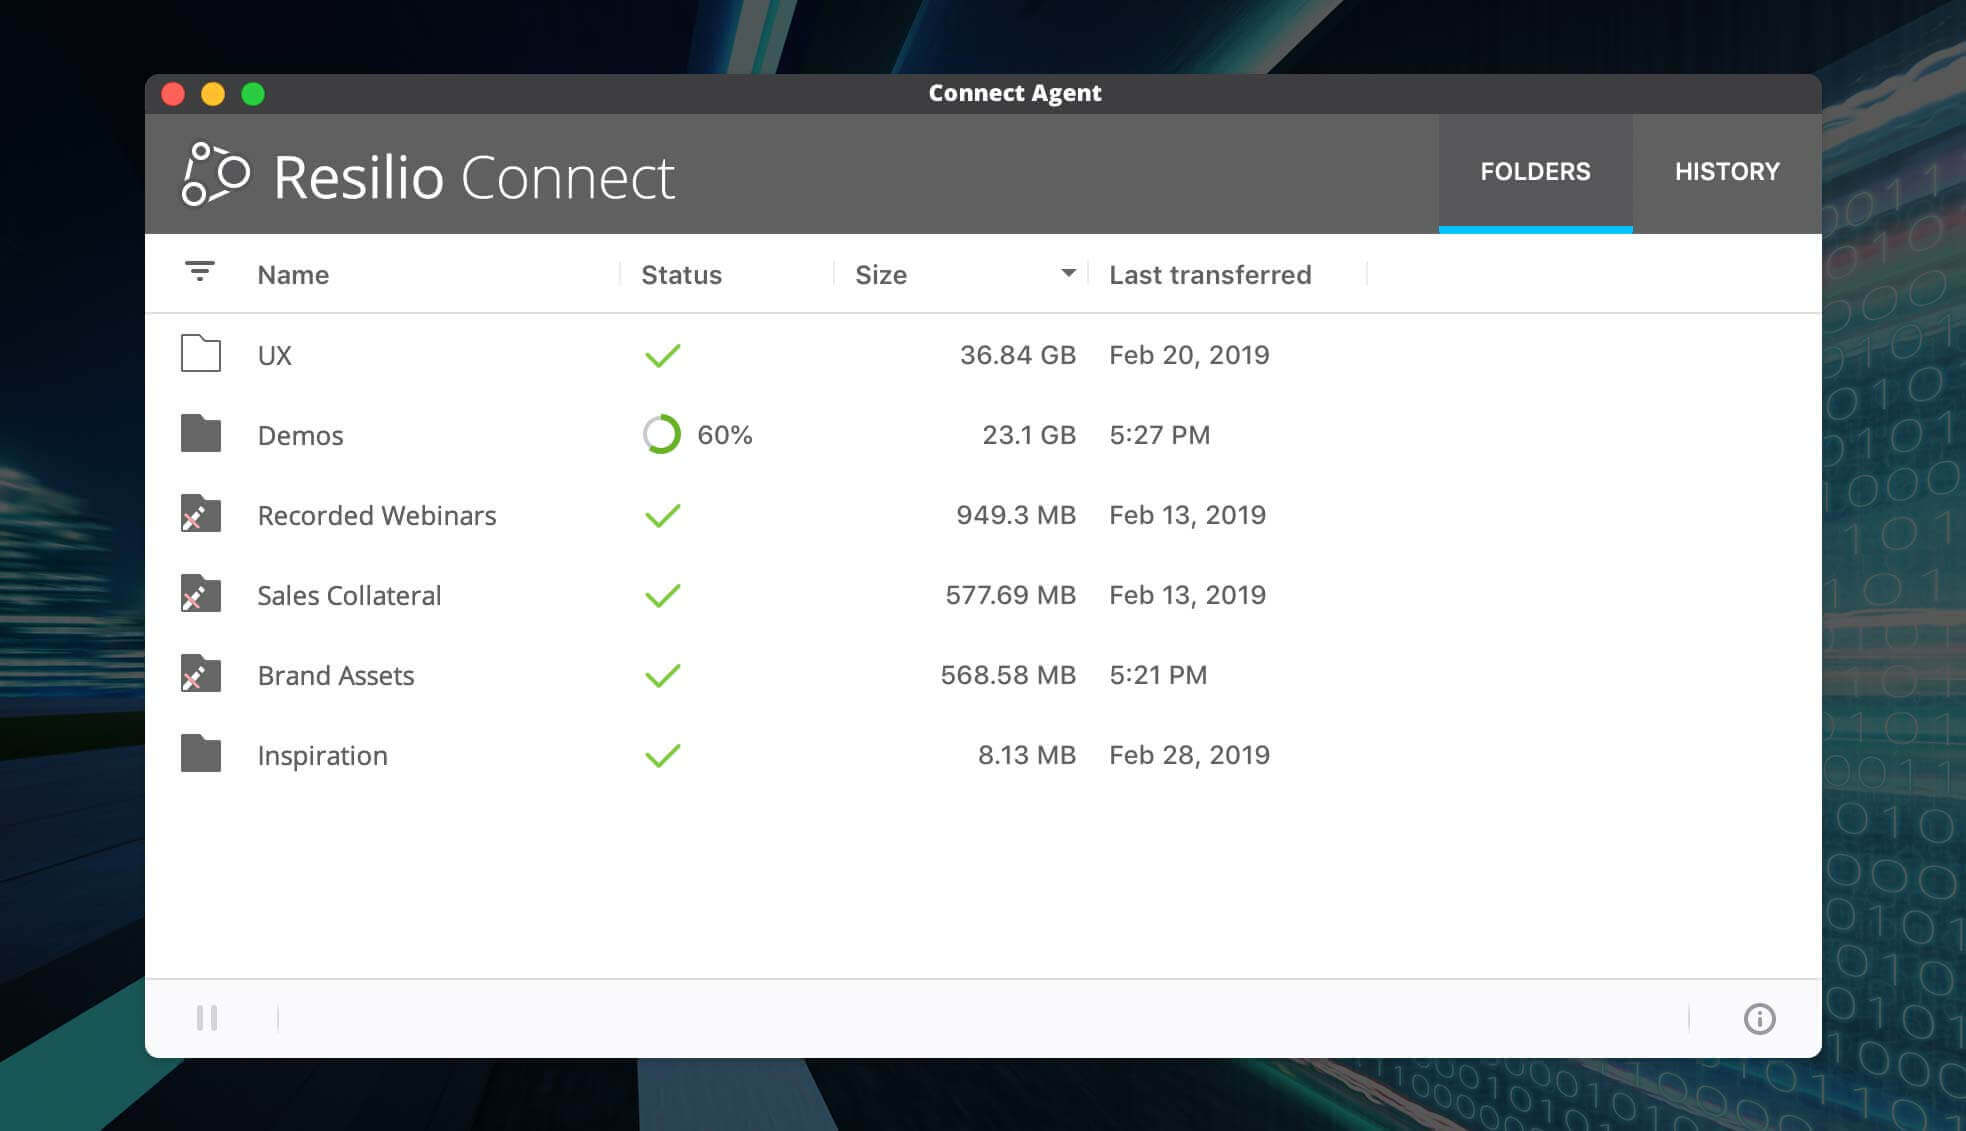 You have the option to offer each partner a simple UI that shows folders, current data transfer progress, and transfer history.  Or, you can choose to let partners interface with Connect without this UI, and just use the native file system.